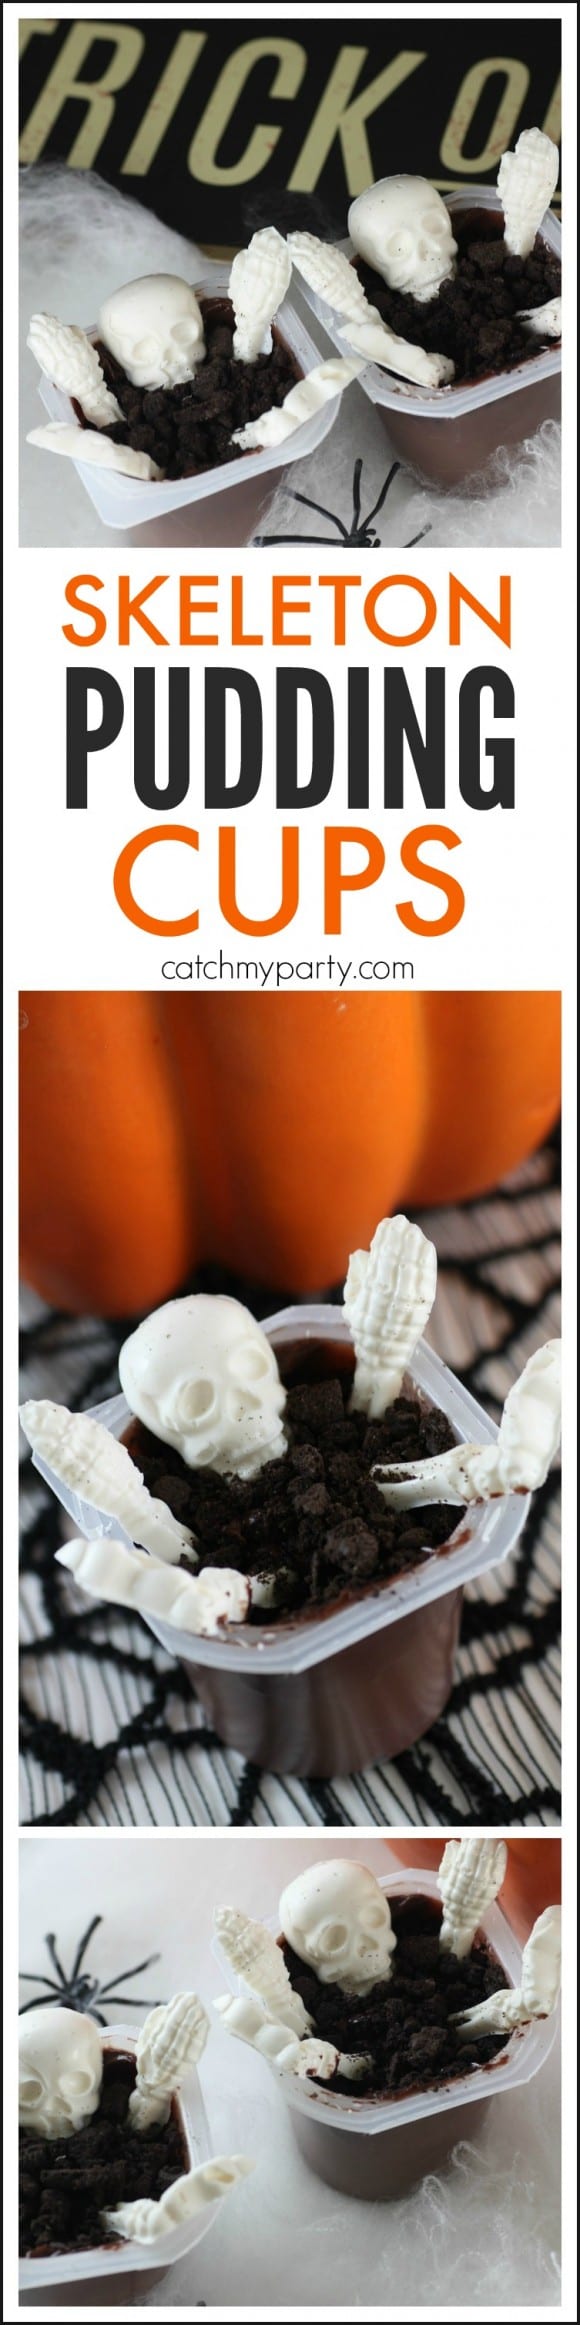 Easy Halloween Skeleton Pudding Cups | CatchMyParty.com